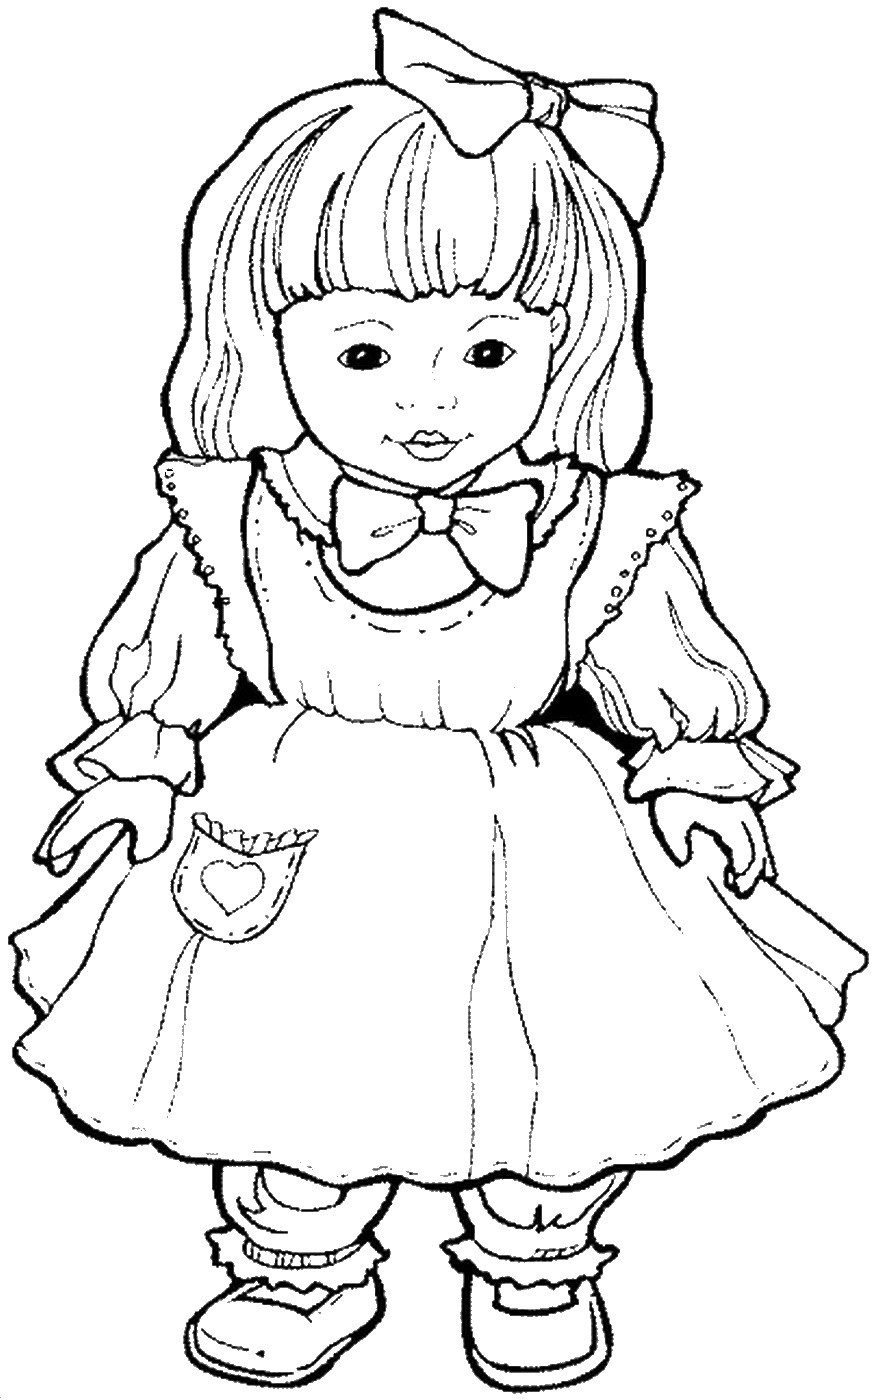 Baby Doll Coloring Page
 Dolls Coloring Pages